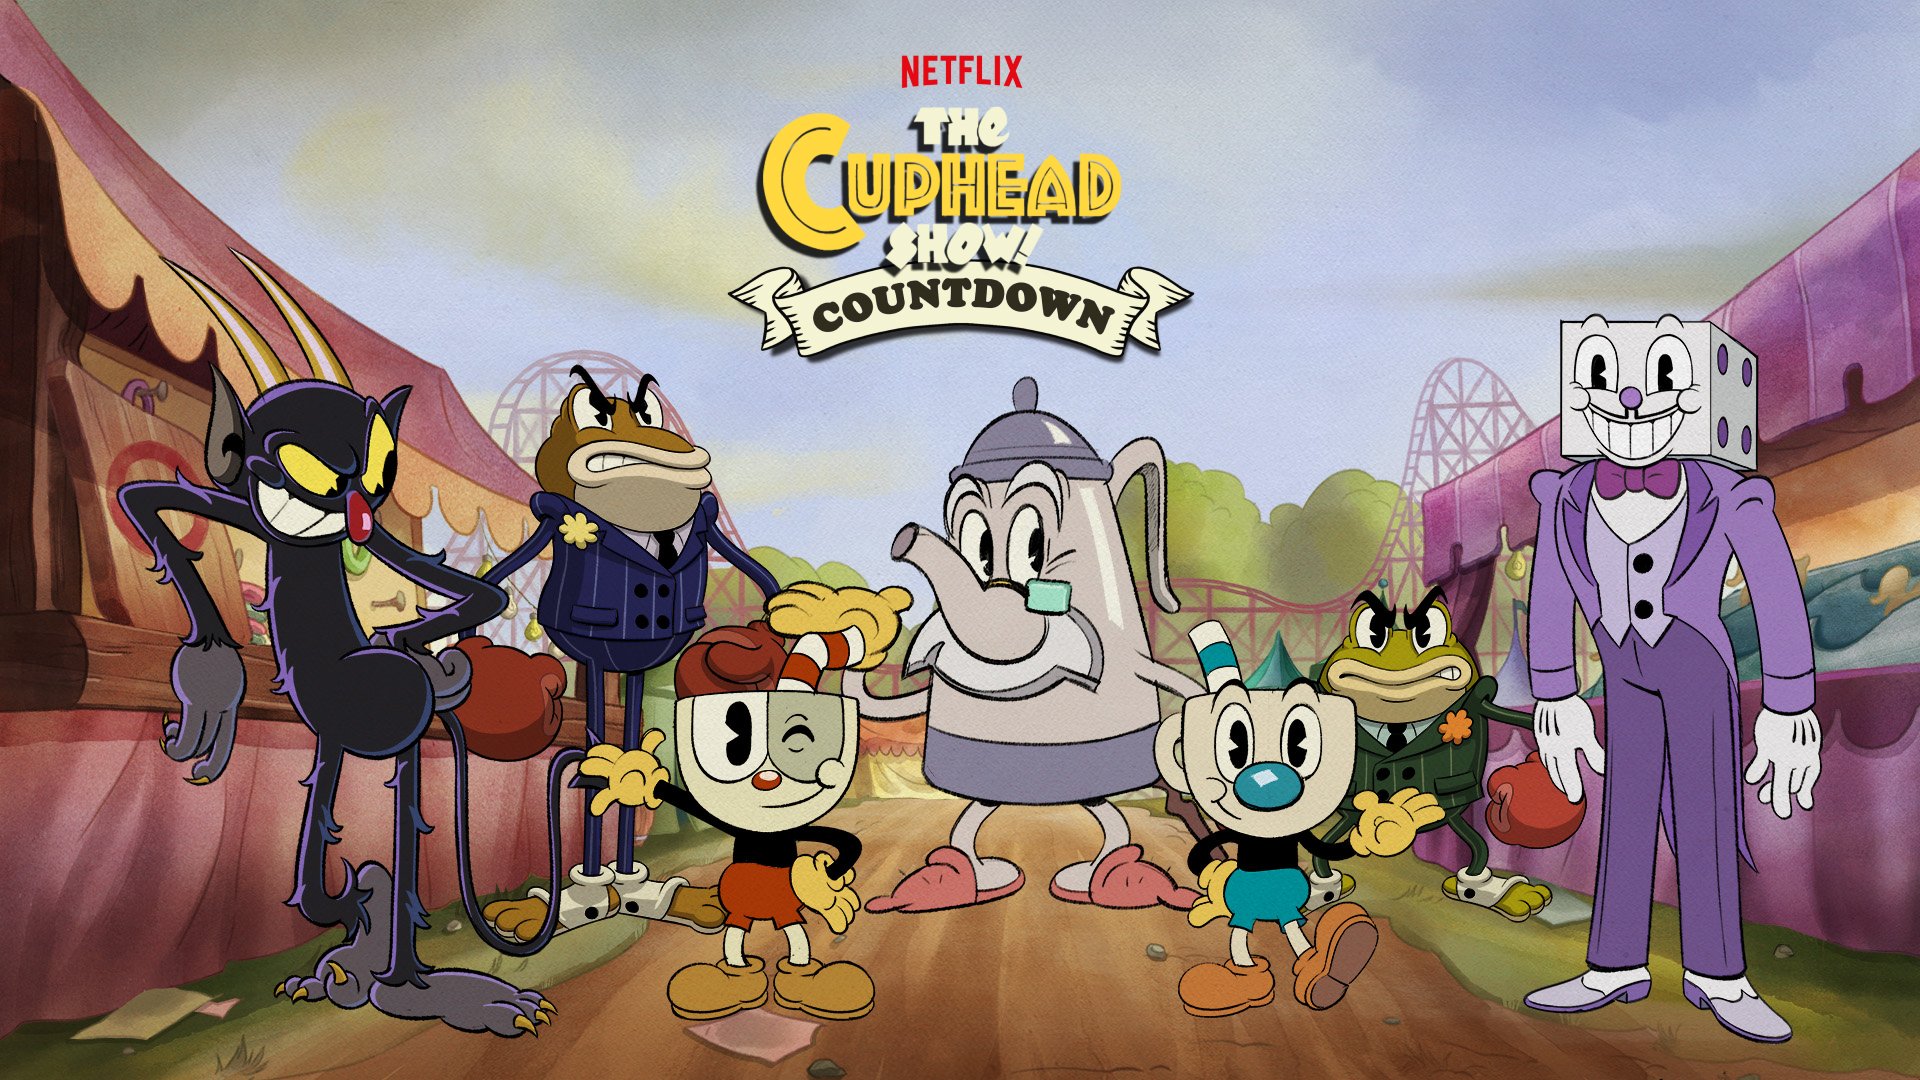 Cuphead Wallpapers